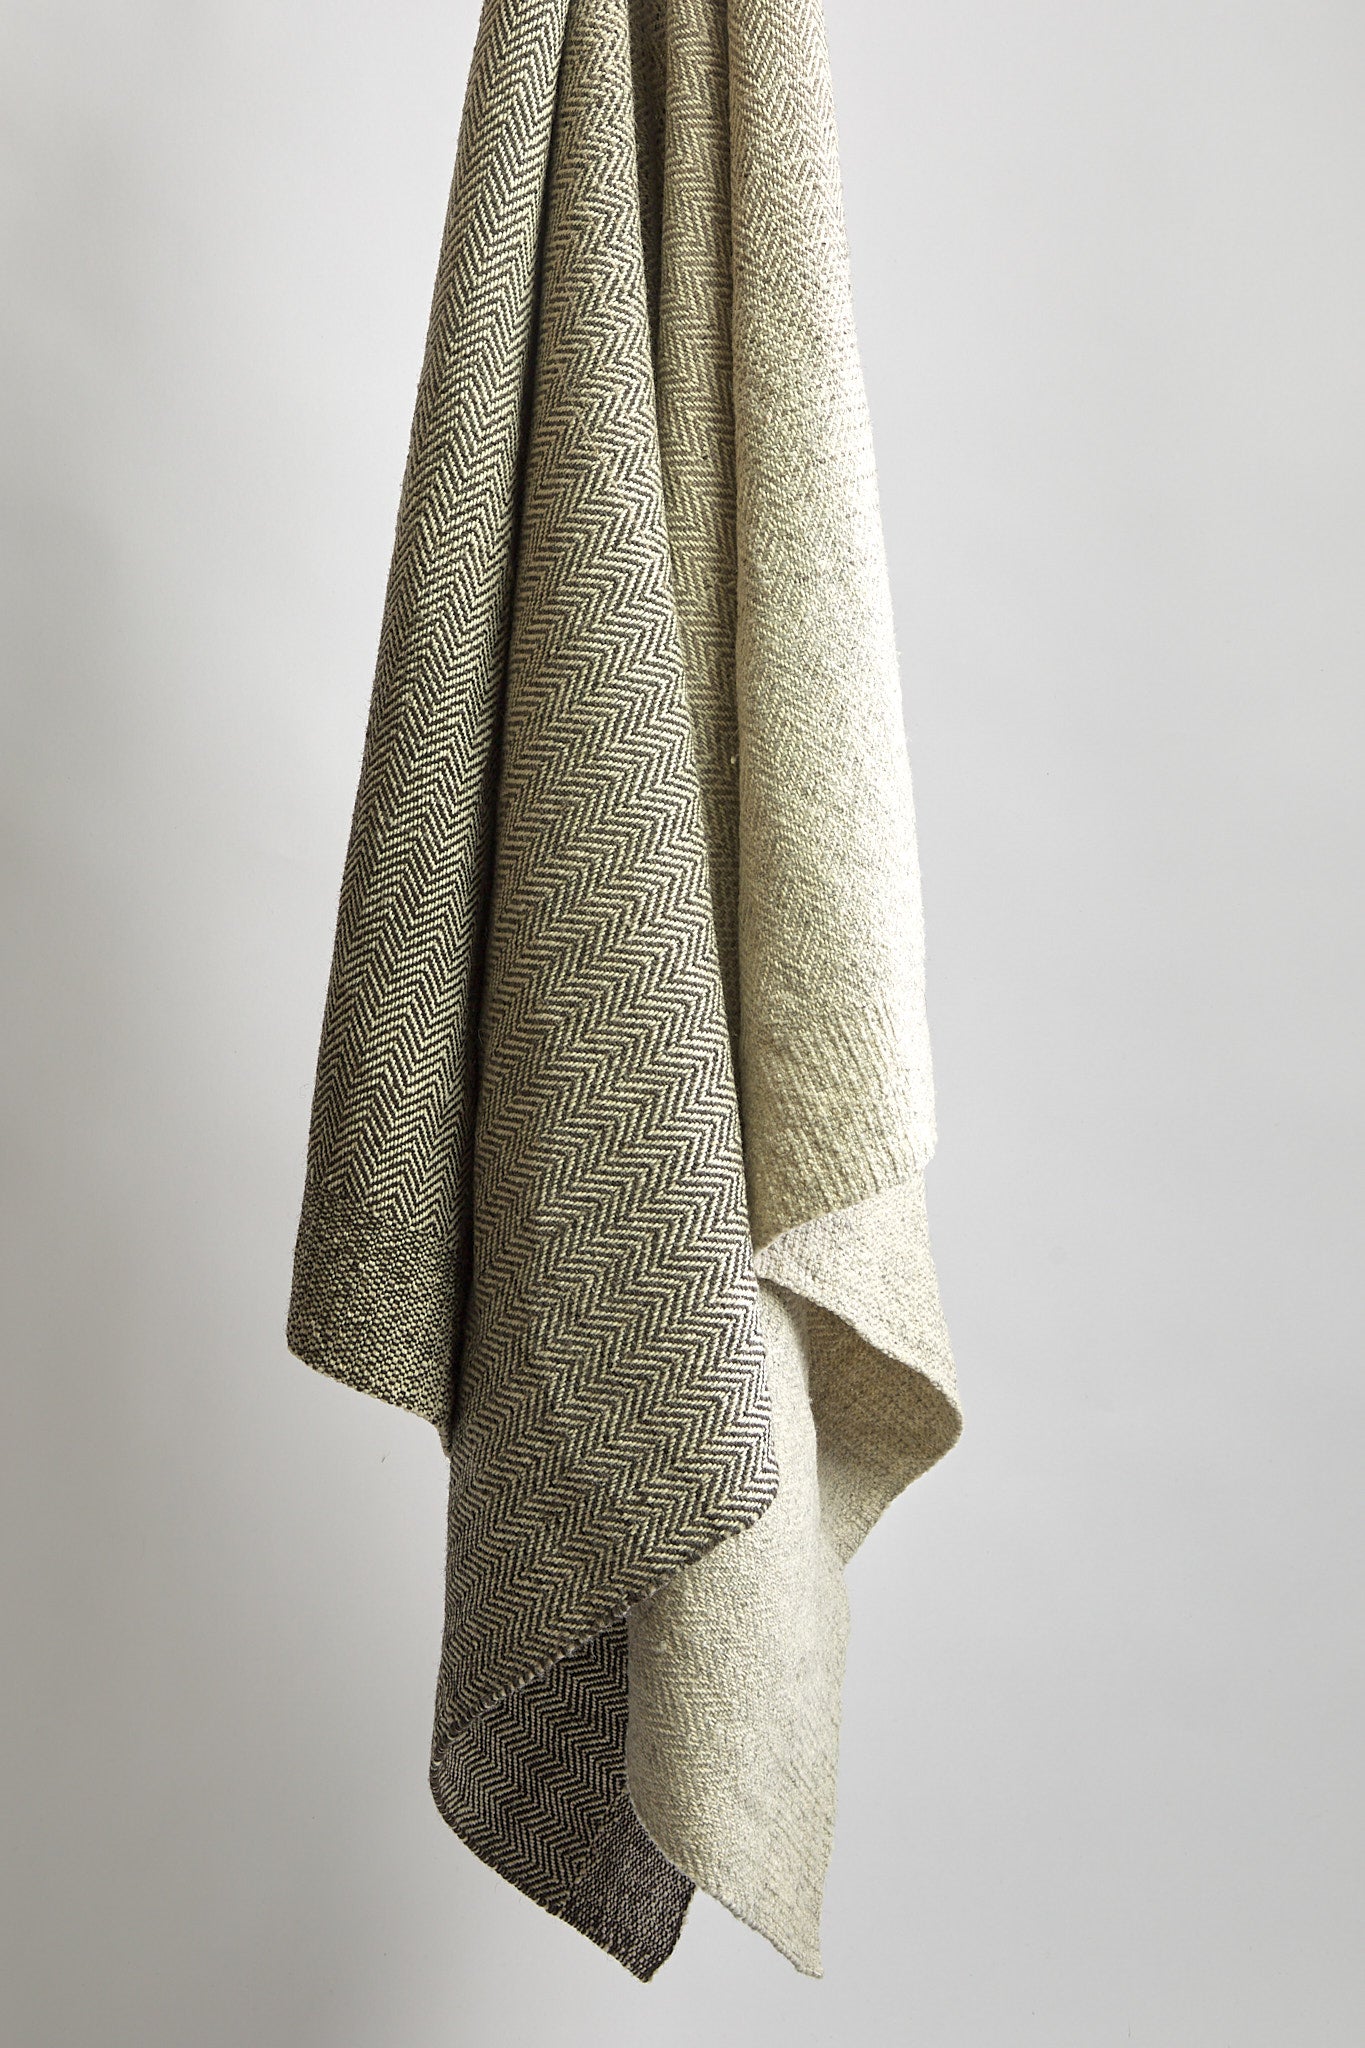 Natural wool throw blanket chevron pattern ombre color effect in light to dark neutral beige color handwoven in Mexico